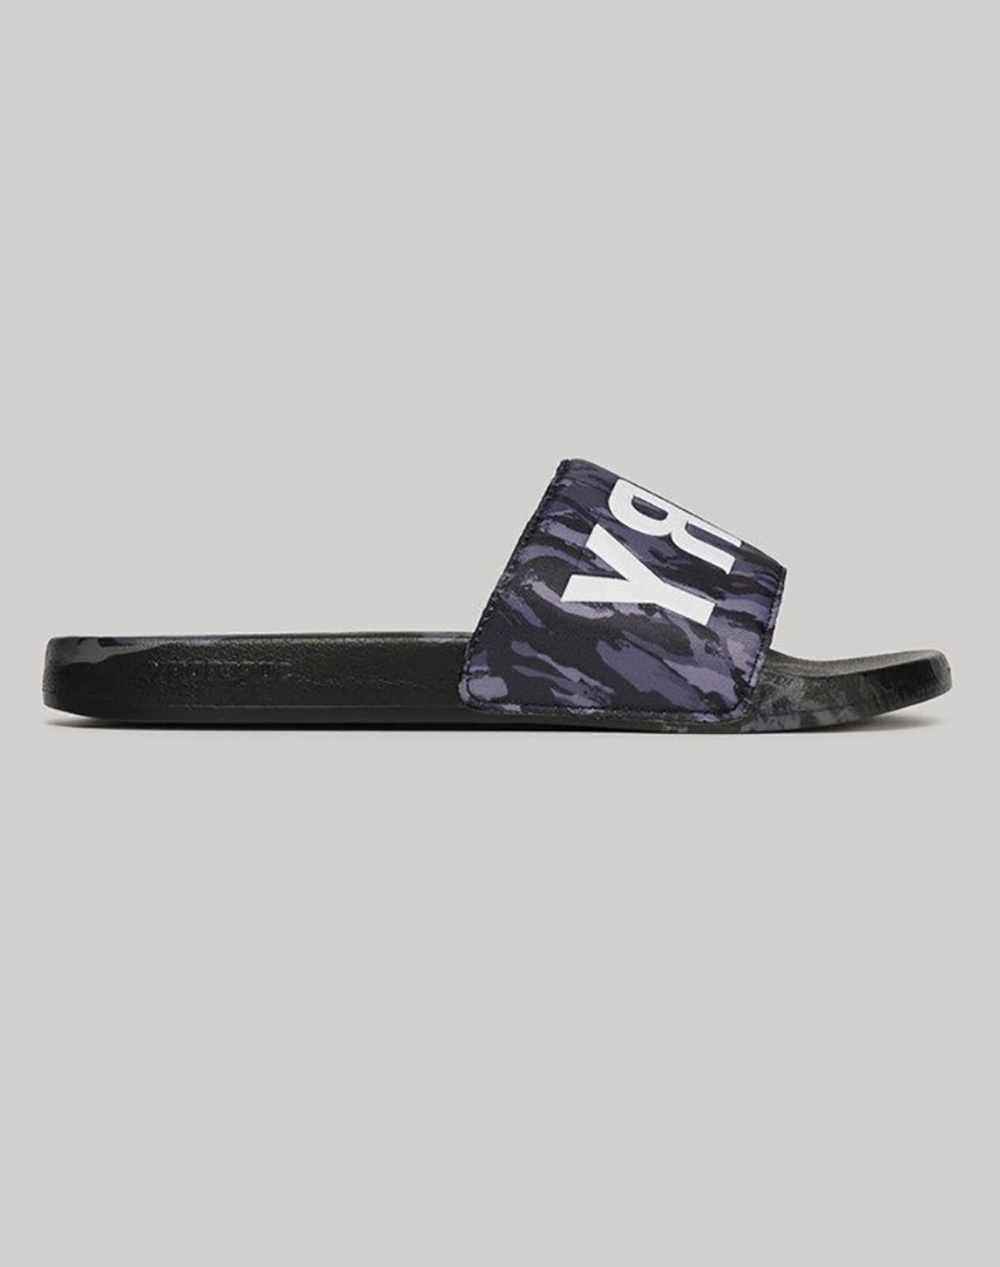 SUPERDRY D2 SDRY CAMO VEGAN POOL SLIDE ΠΑΠΟΥΤΣΙ ΑΝΔΡΙΚΟ MF310261A-9TO Mixed 3820ASUPE6440024_XR28785